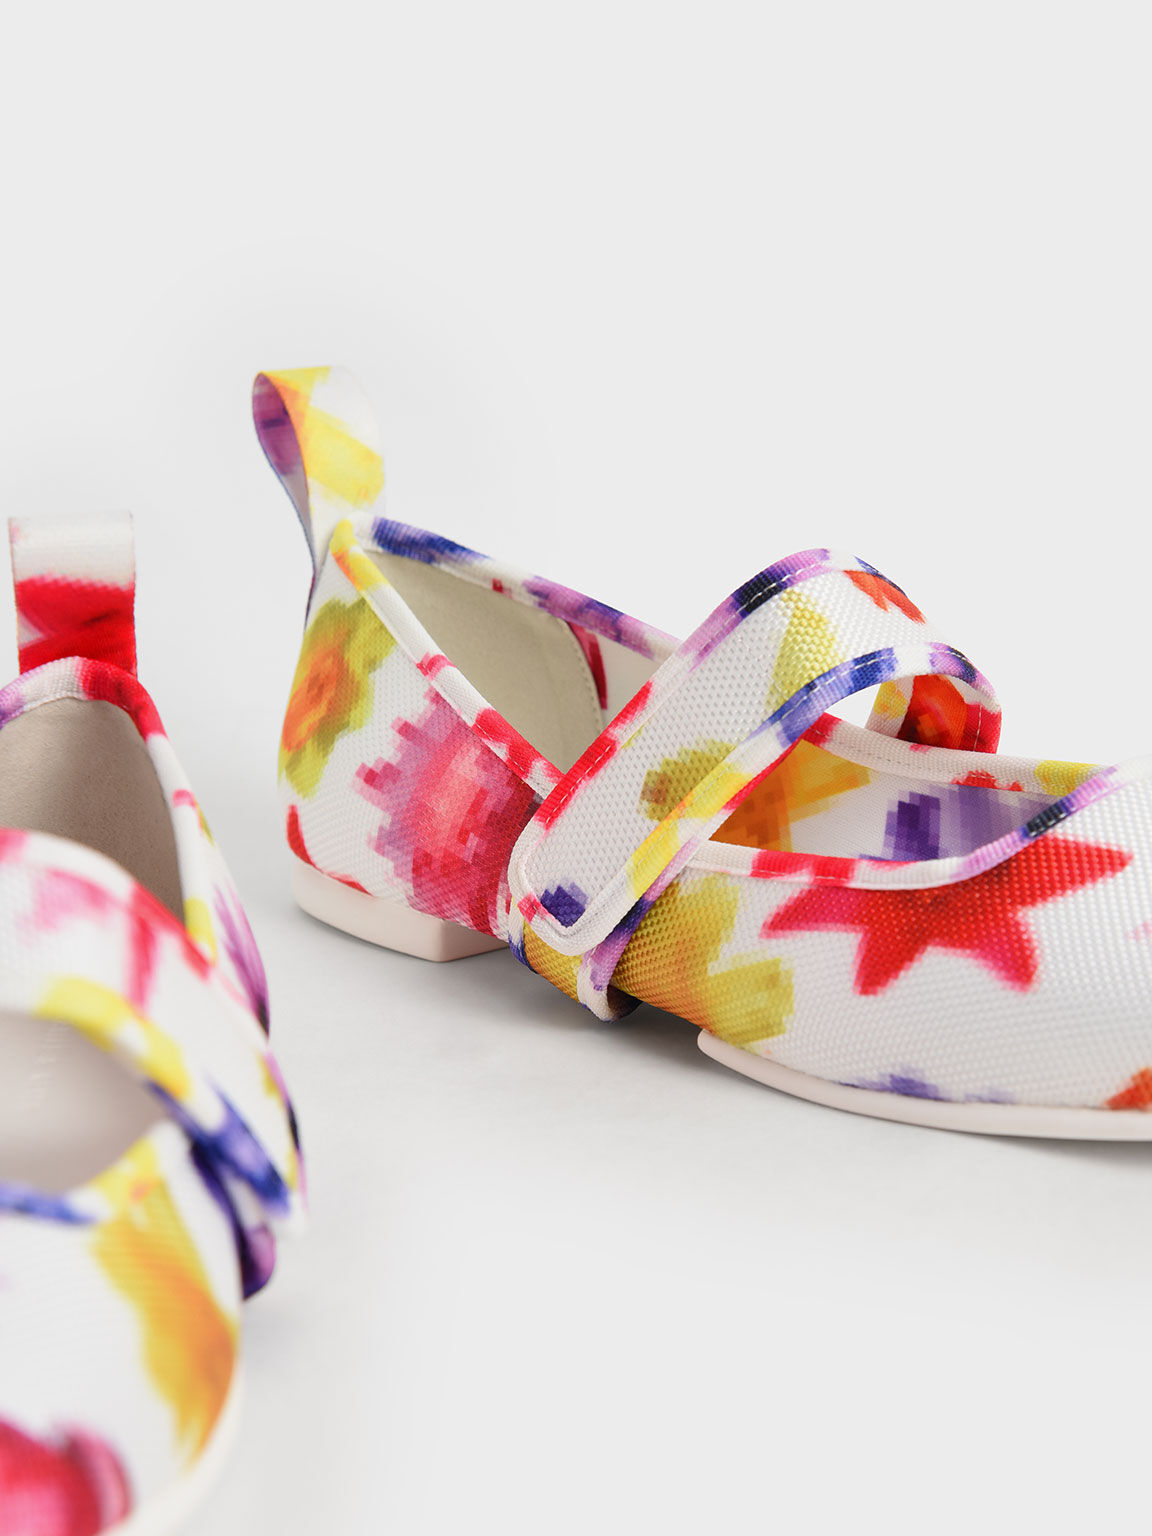 Nori Recycled Polyester Printed Mary Jane Flats, Multi, hi-res